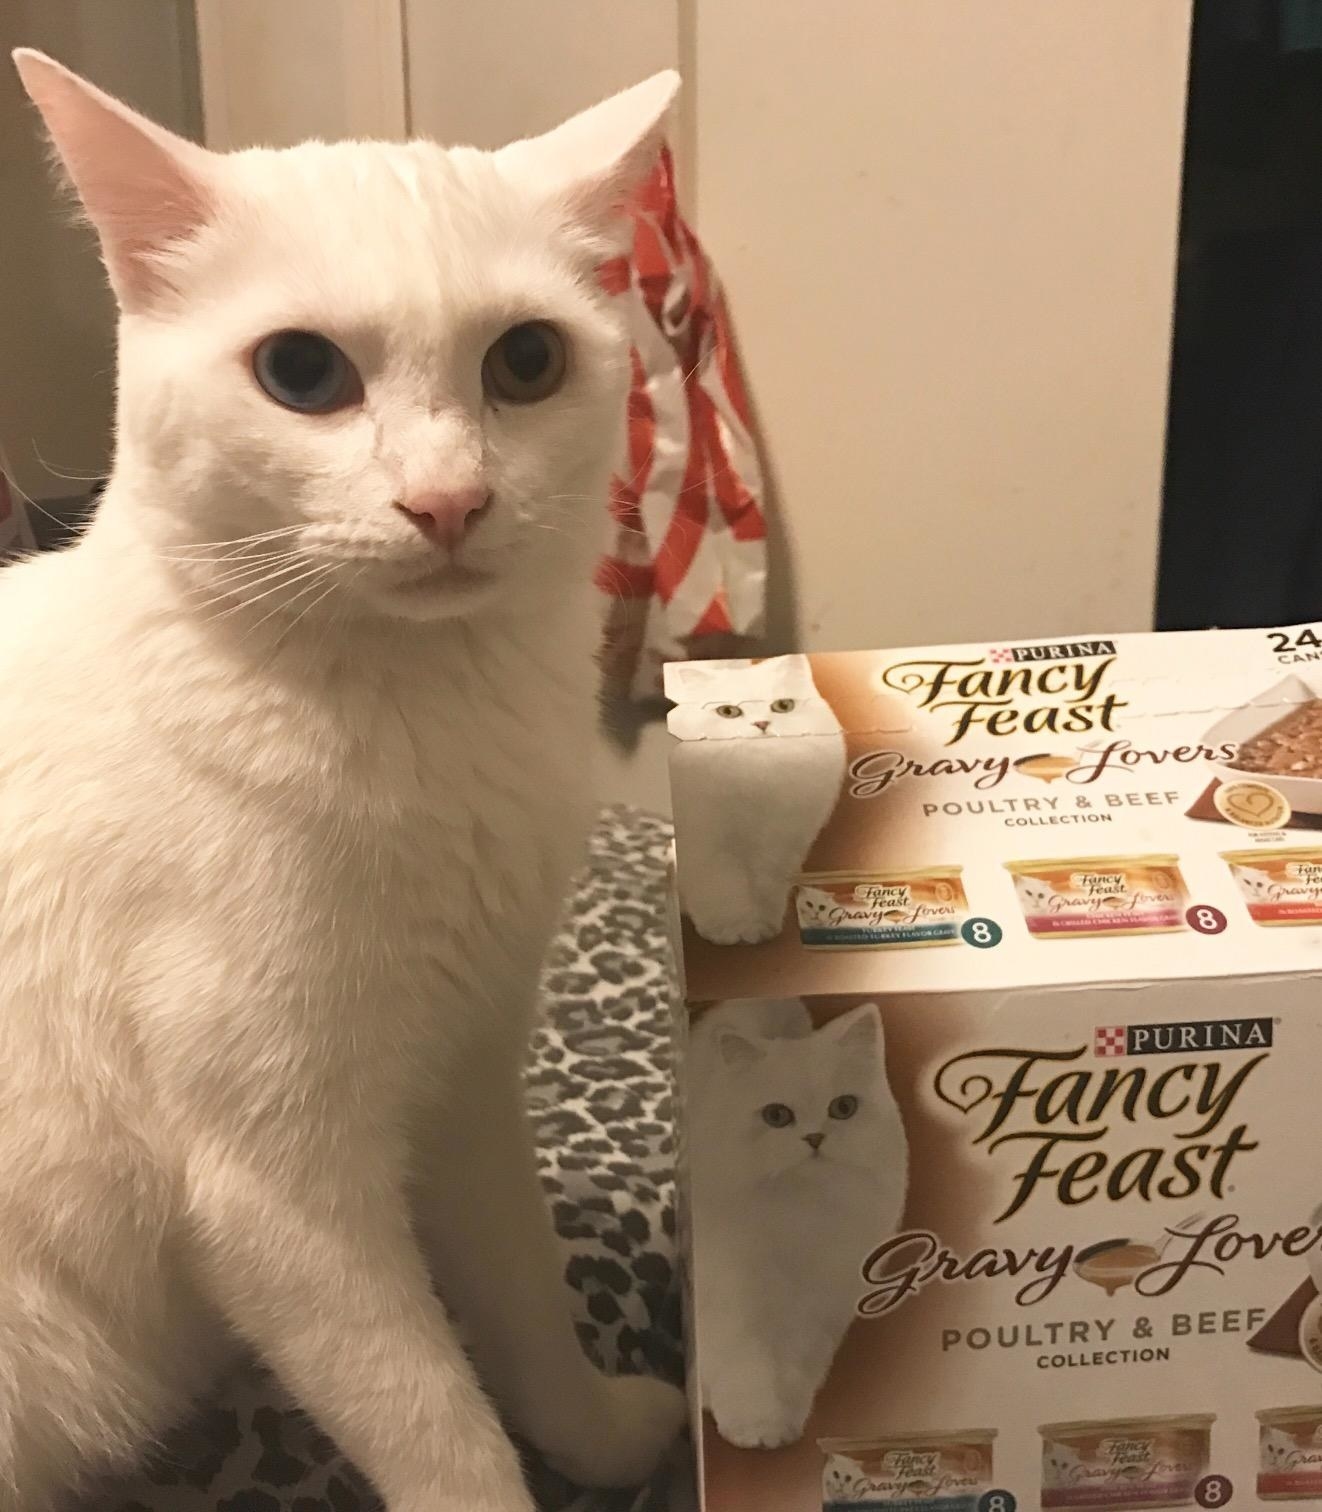 A white cat tries poses with the food